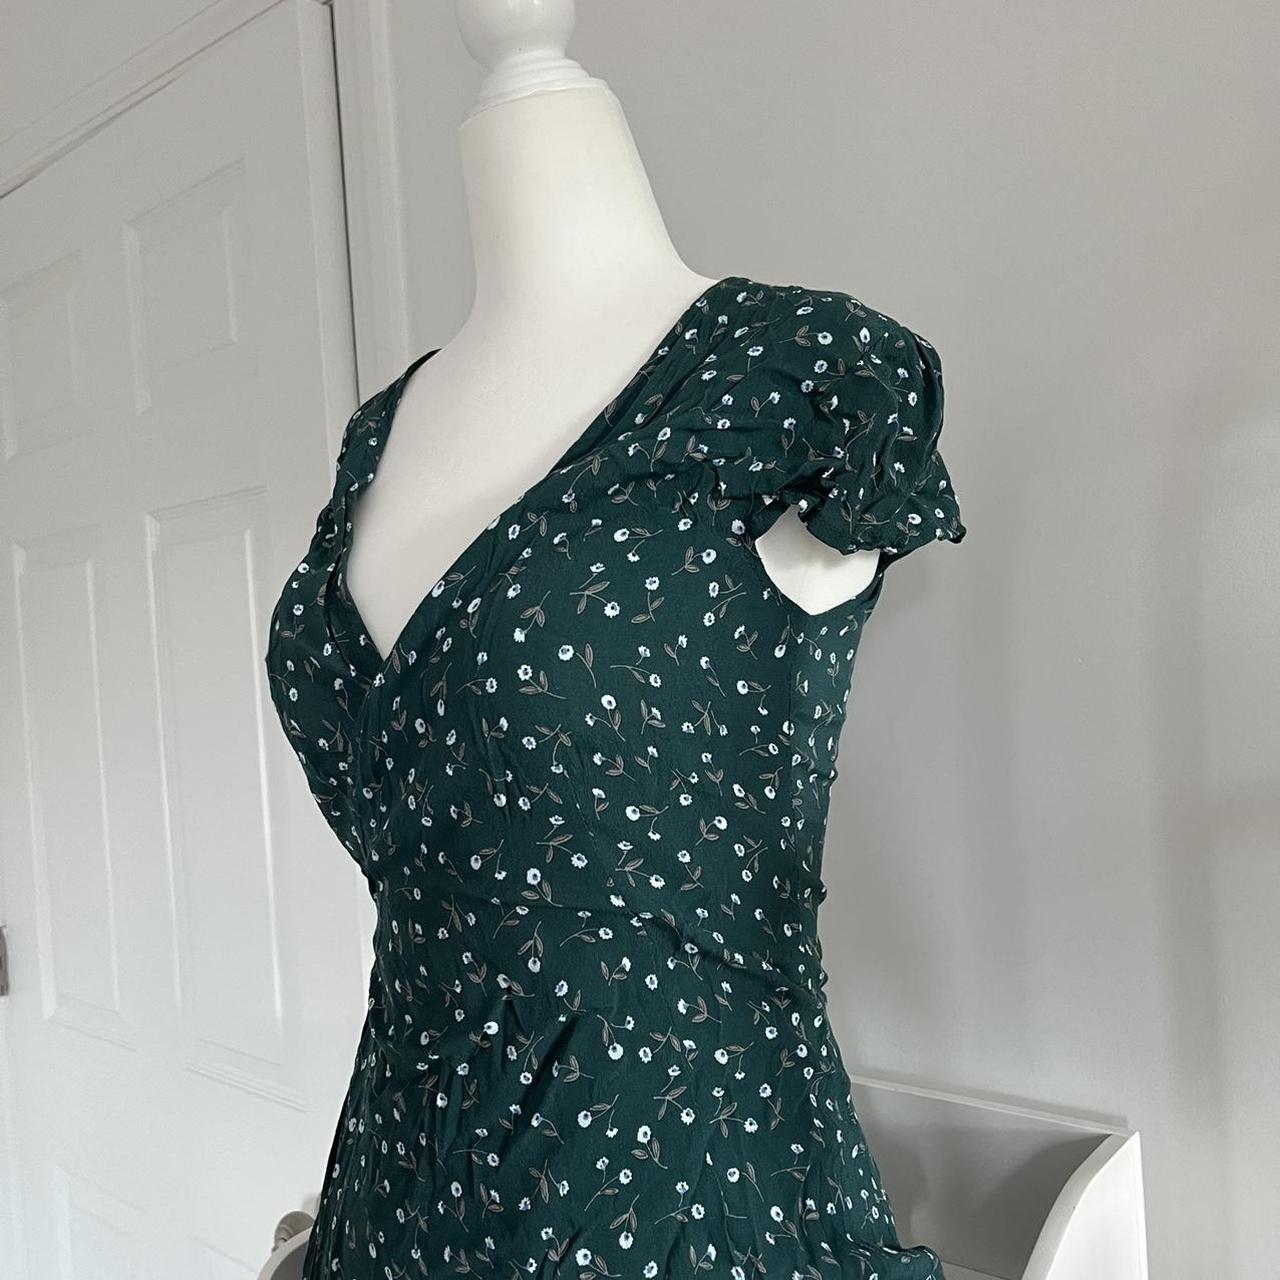 Brandy Melville blue green floral robbie dress NWT  Yes to the dress,  Colorful dresses, Brandy melville